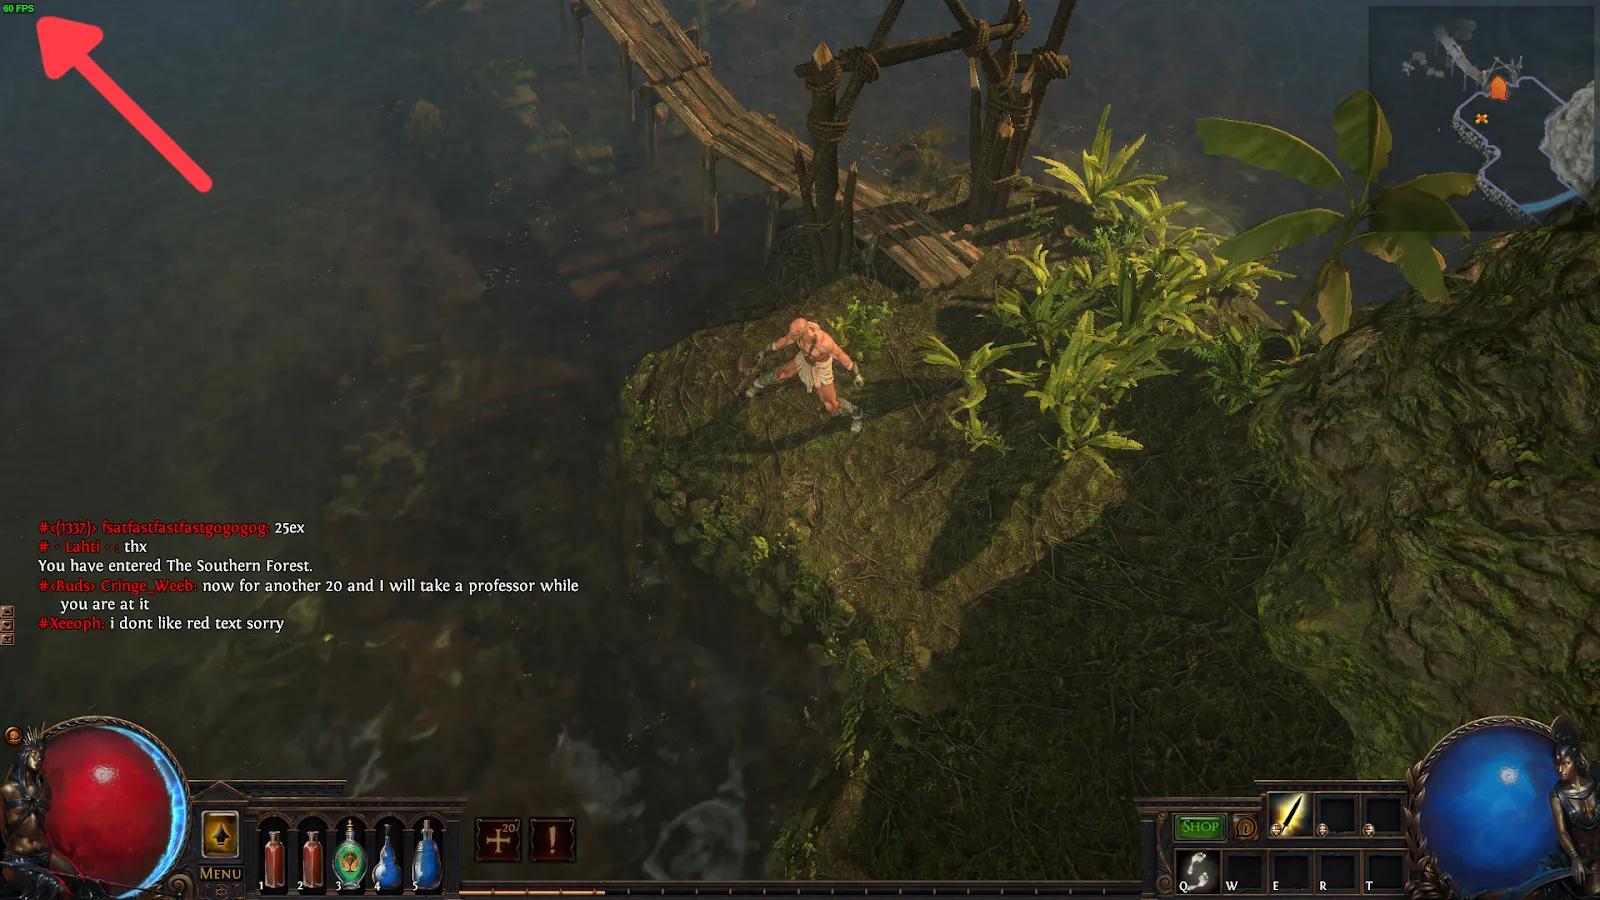 Steam show FPS guide demonstration image in Path of Exile